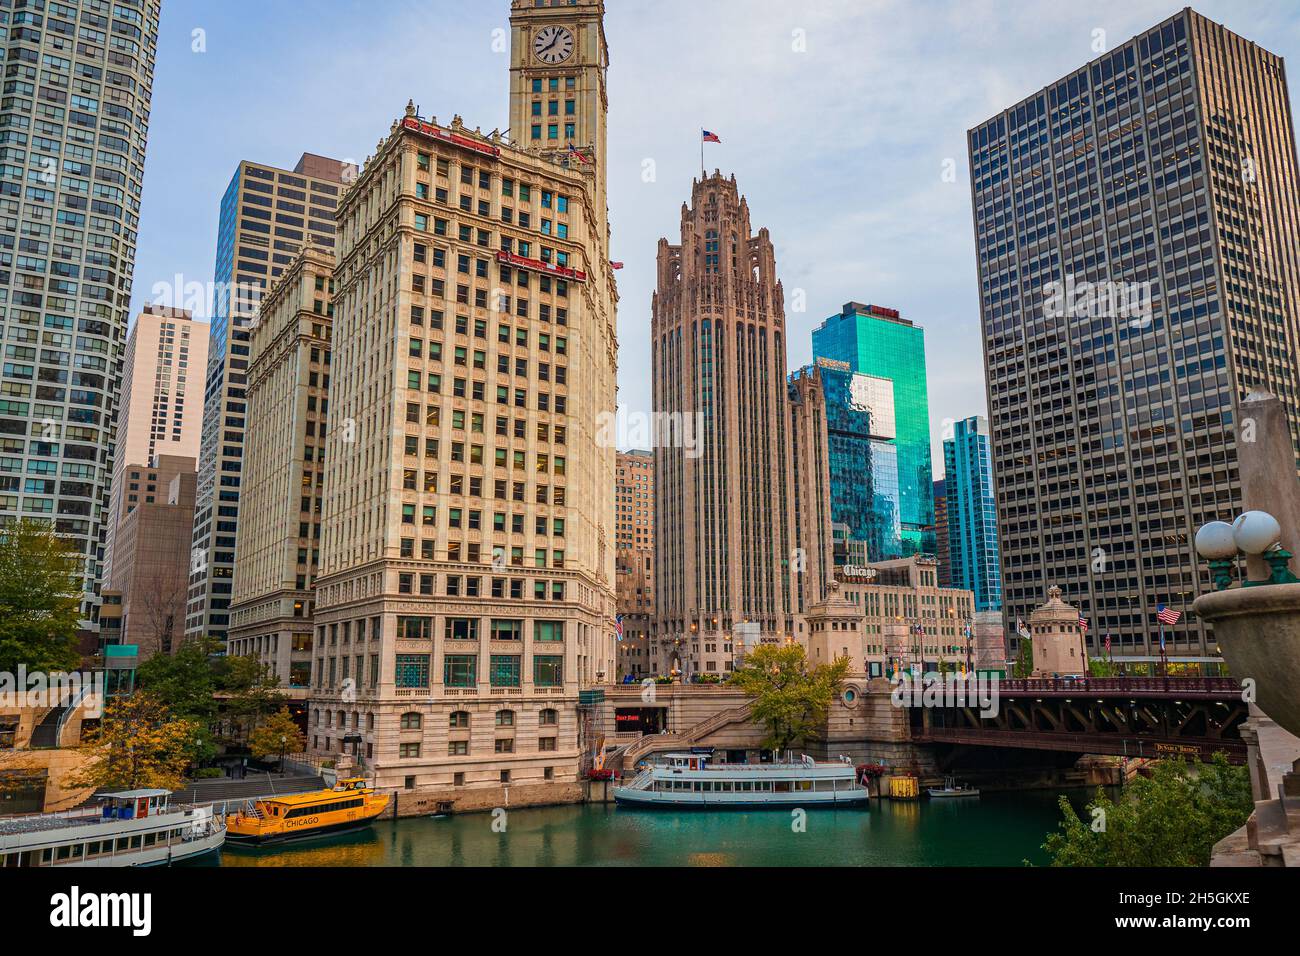 Early morning view of the main stem of the Chicago River with skyscrapers in the background, Downtown Chicago, IL, USA Stock Photo